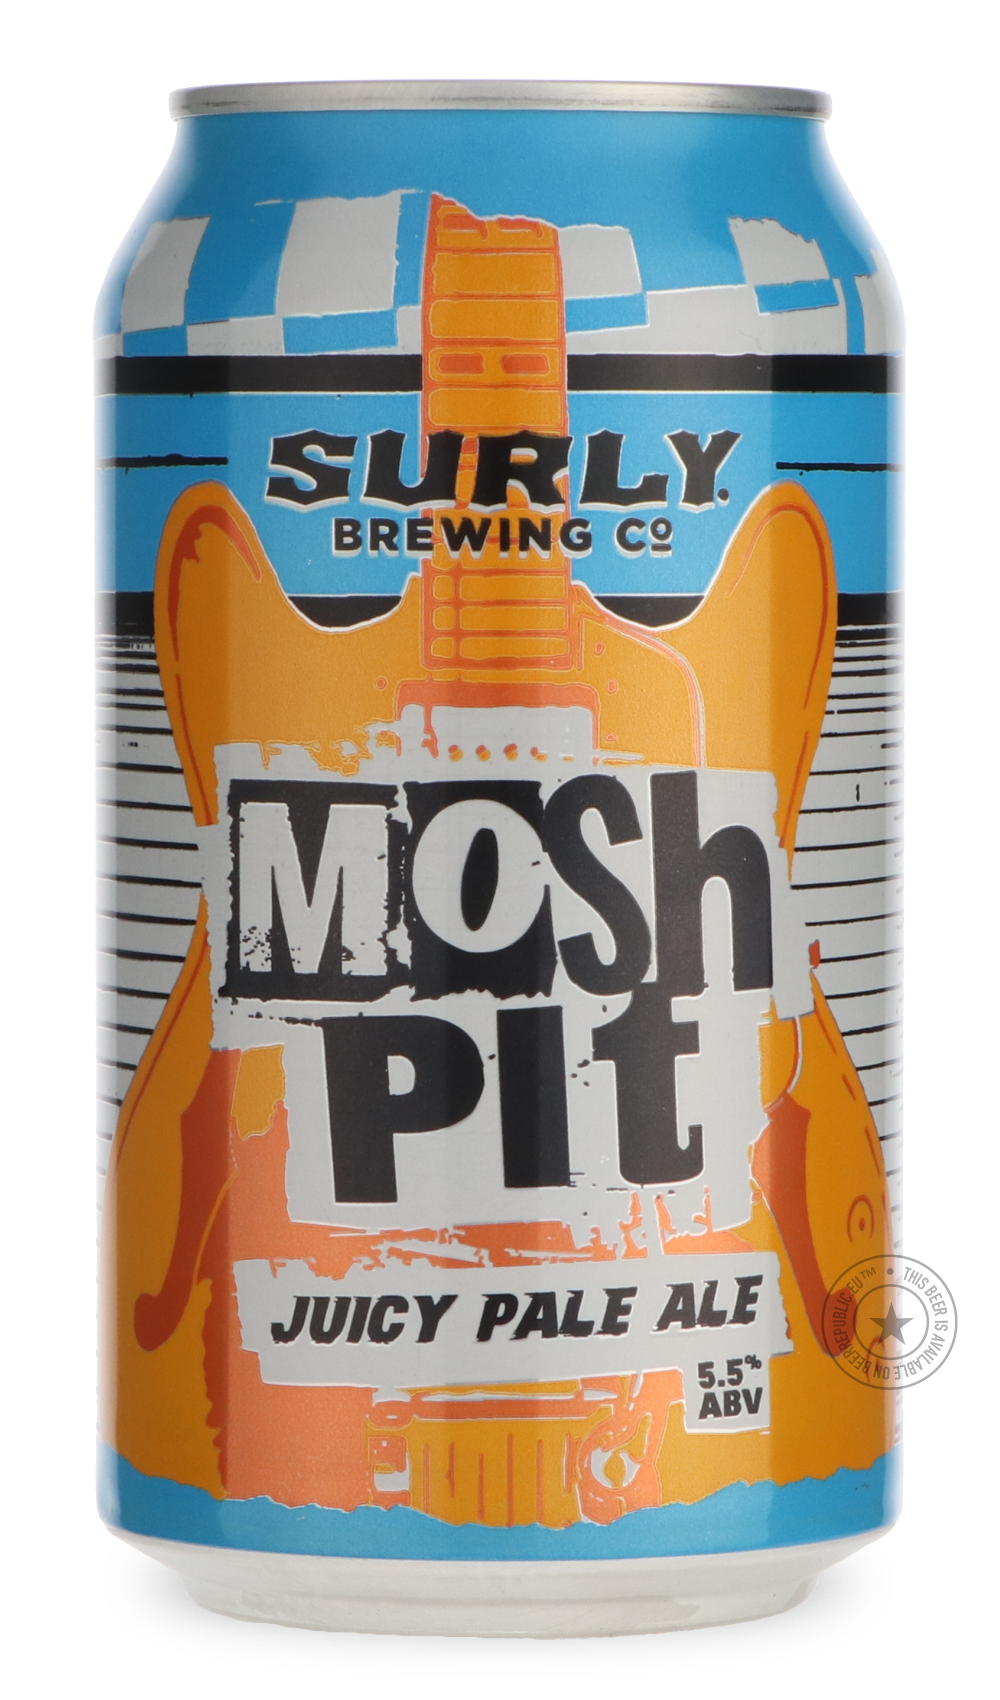 -Surly- Mosh Pit Juicy-Pale- Only @ Beer Republic - The best online beer store for American & Canadian craft beer - Buy beer online from the USA and Canada - Bier online kopen - Amerikaans bier kopen - Craft beer store - Craft beer kopen - Amerikanisch bier kaufen - Bier online kaufen - Acheter biere online - IPA - Stout - Porter - New England IPA - Hazy IPA - Imperial Stout - Barrel Aged - Barrel Aged Imperial Stout - Brown - Dark beer - Blond - Blonde - Pilsner - Lager - Wheat - Weizen - Amber - Barley Wi